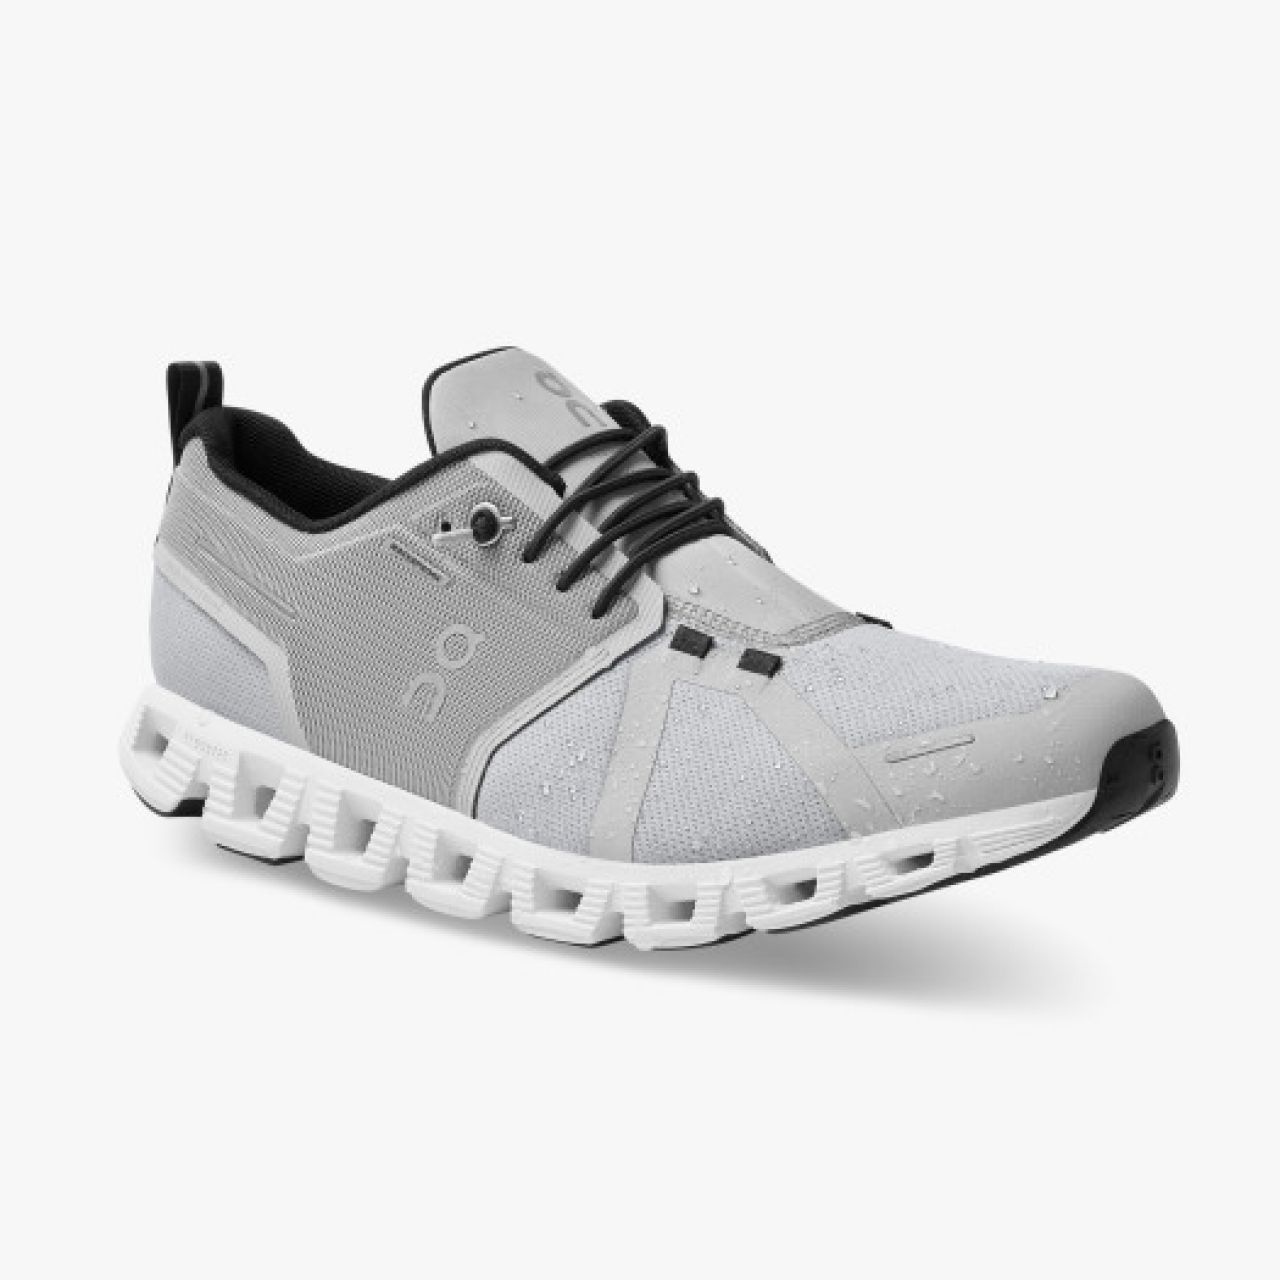 ON RUNNING CLOUD 5 WATERPROOF WHITE GLACIER Chaussures étanche